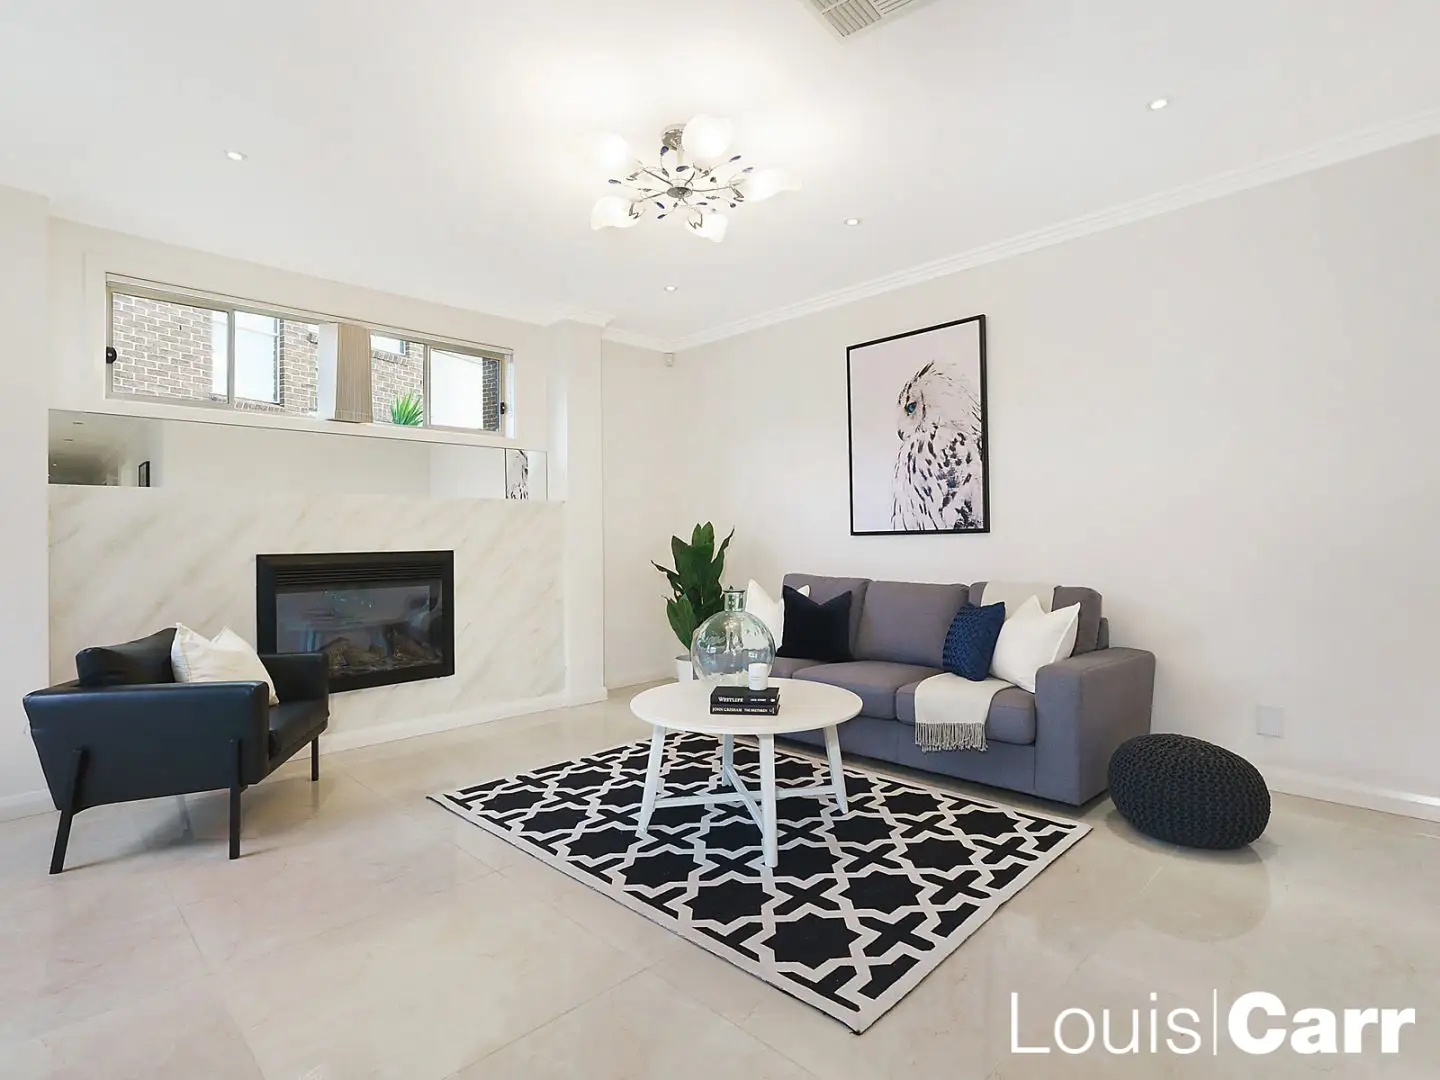 Photo #2: 22 Blundell Circuit, Kellyville - Sold by Louis Carr Real Estate